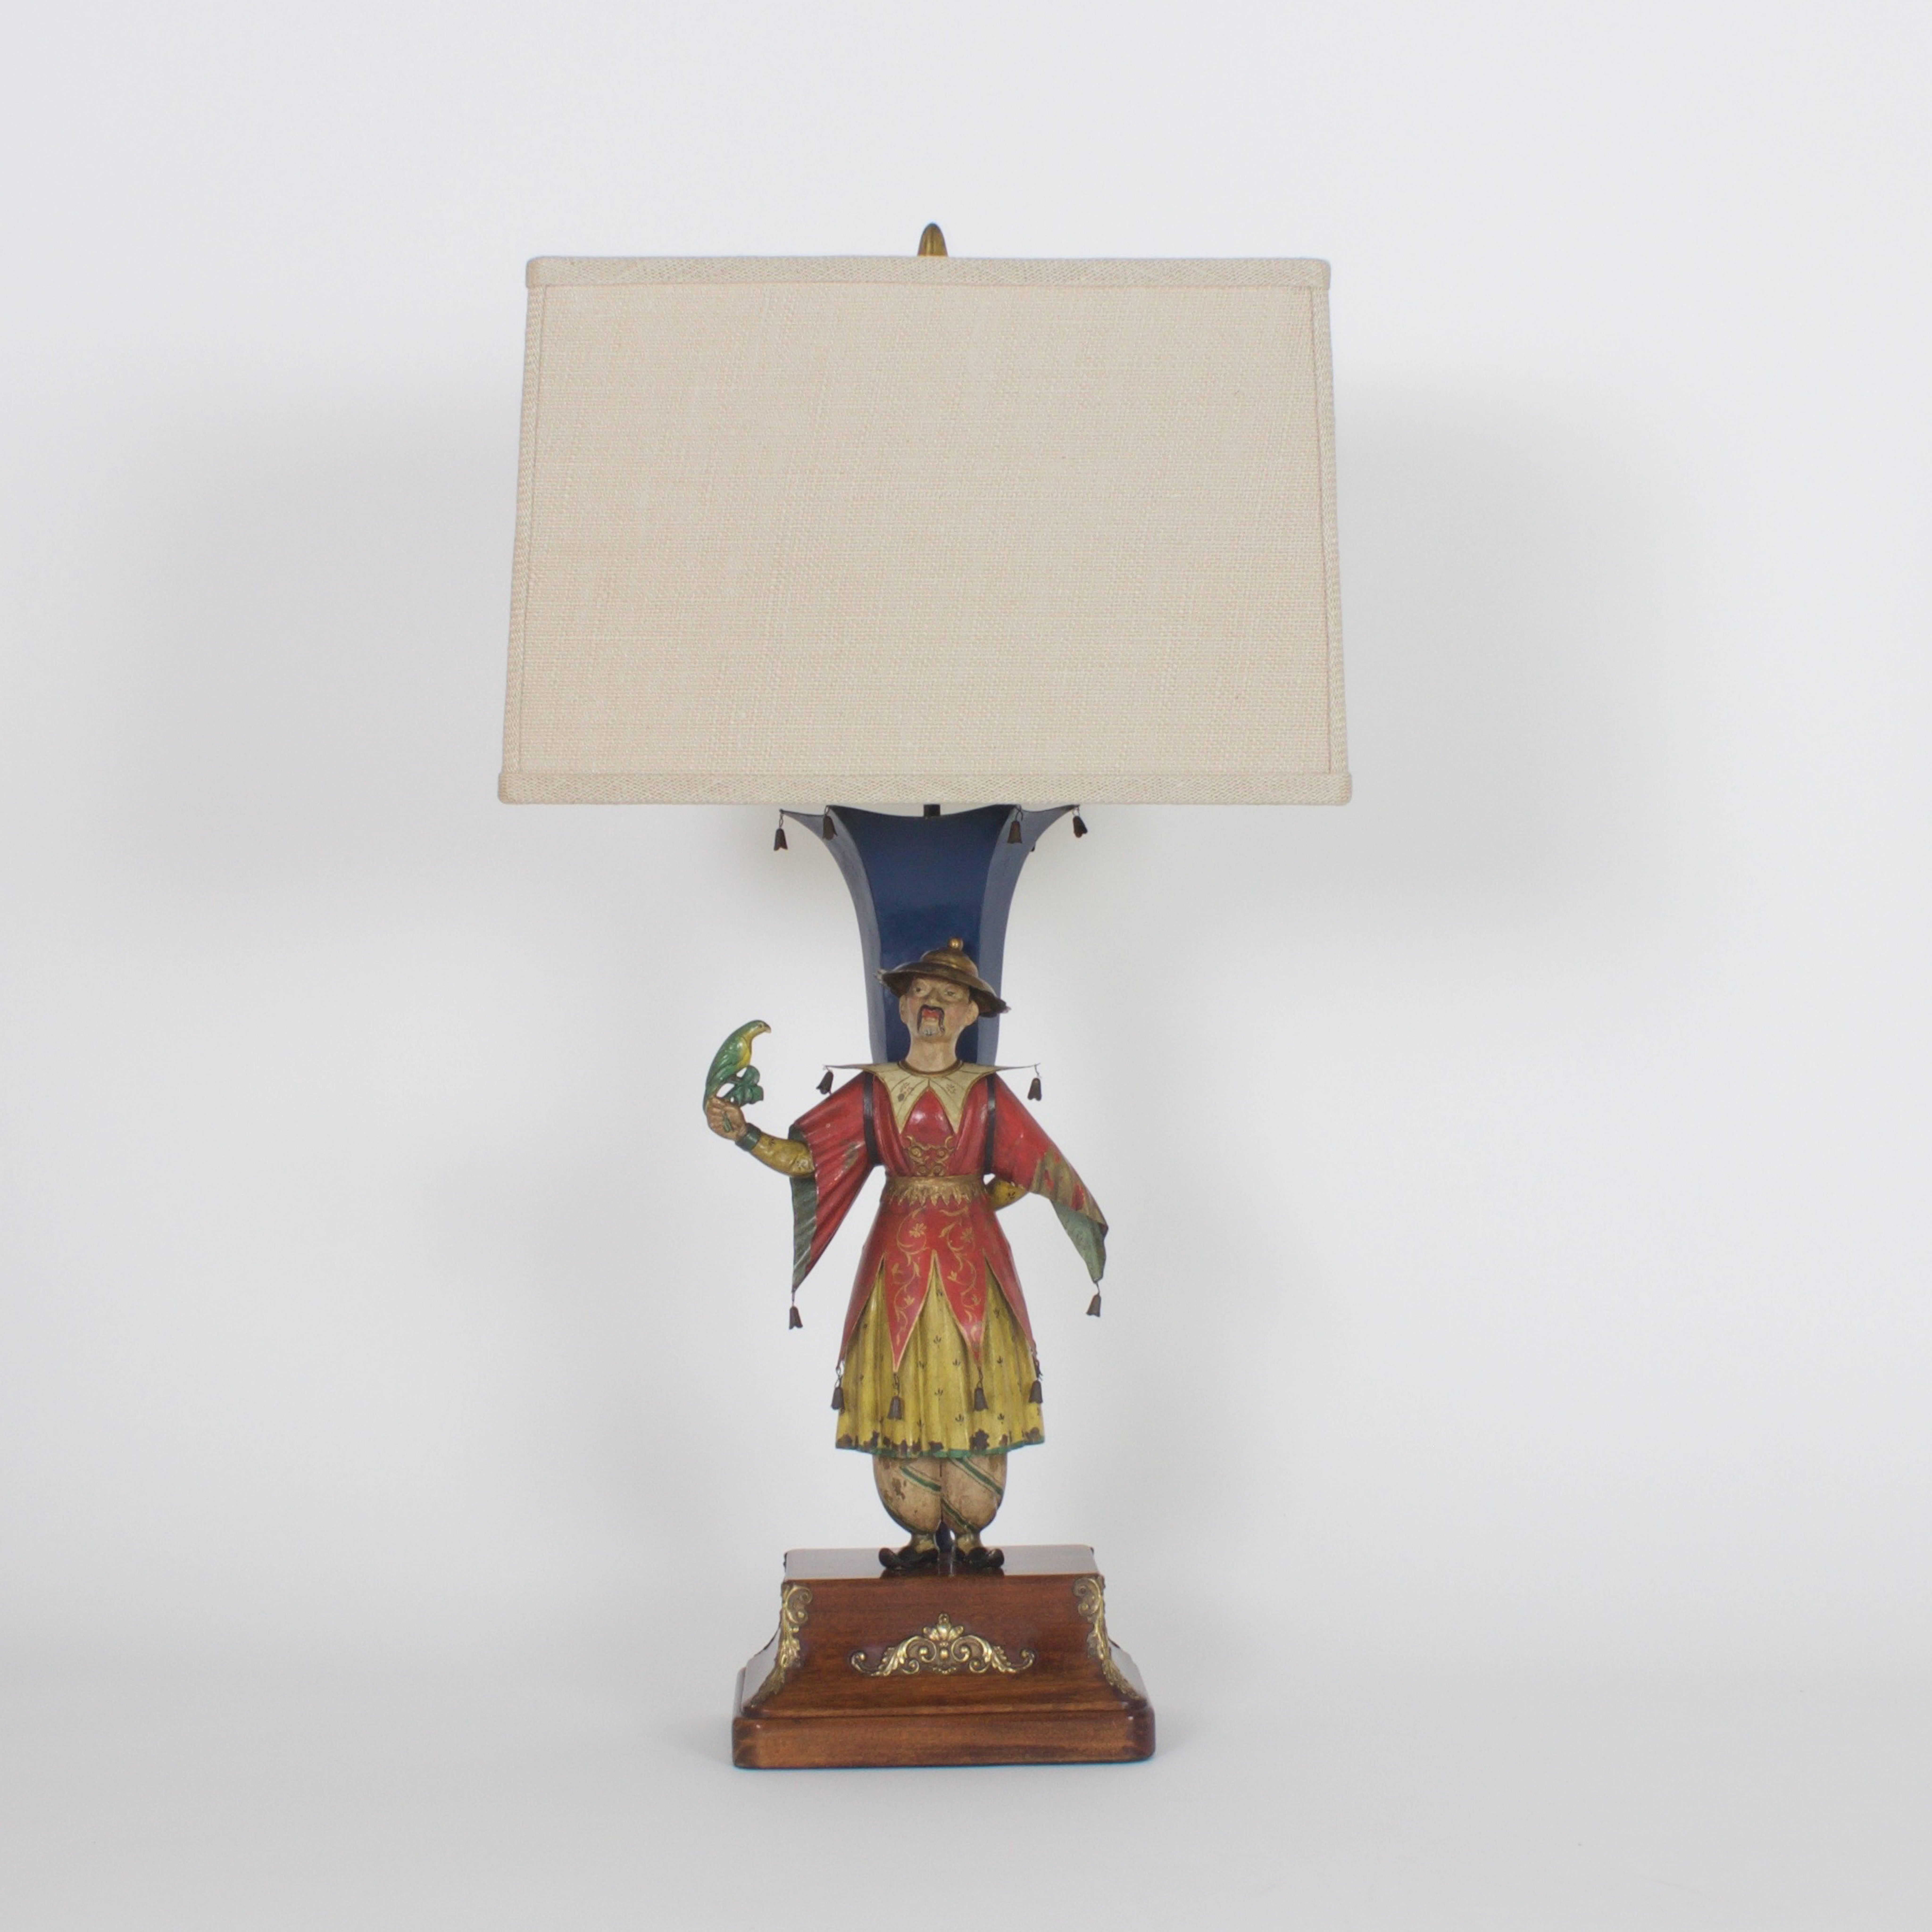 Here is a pair of chinoiserie, tole male and female figural table lamps with an elevated level of craftsmanship. There is a depth of character in the painted faces rarely seen in the decorative arts. The painted tole wardrobes suggest a hidden